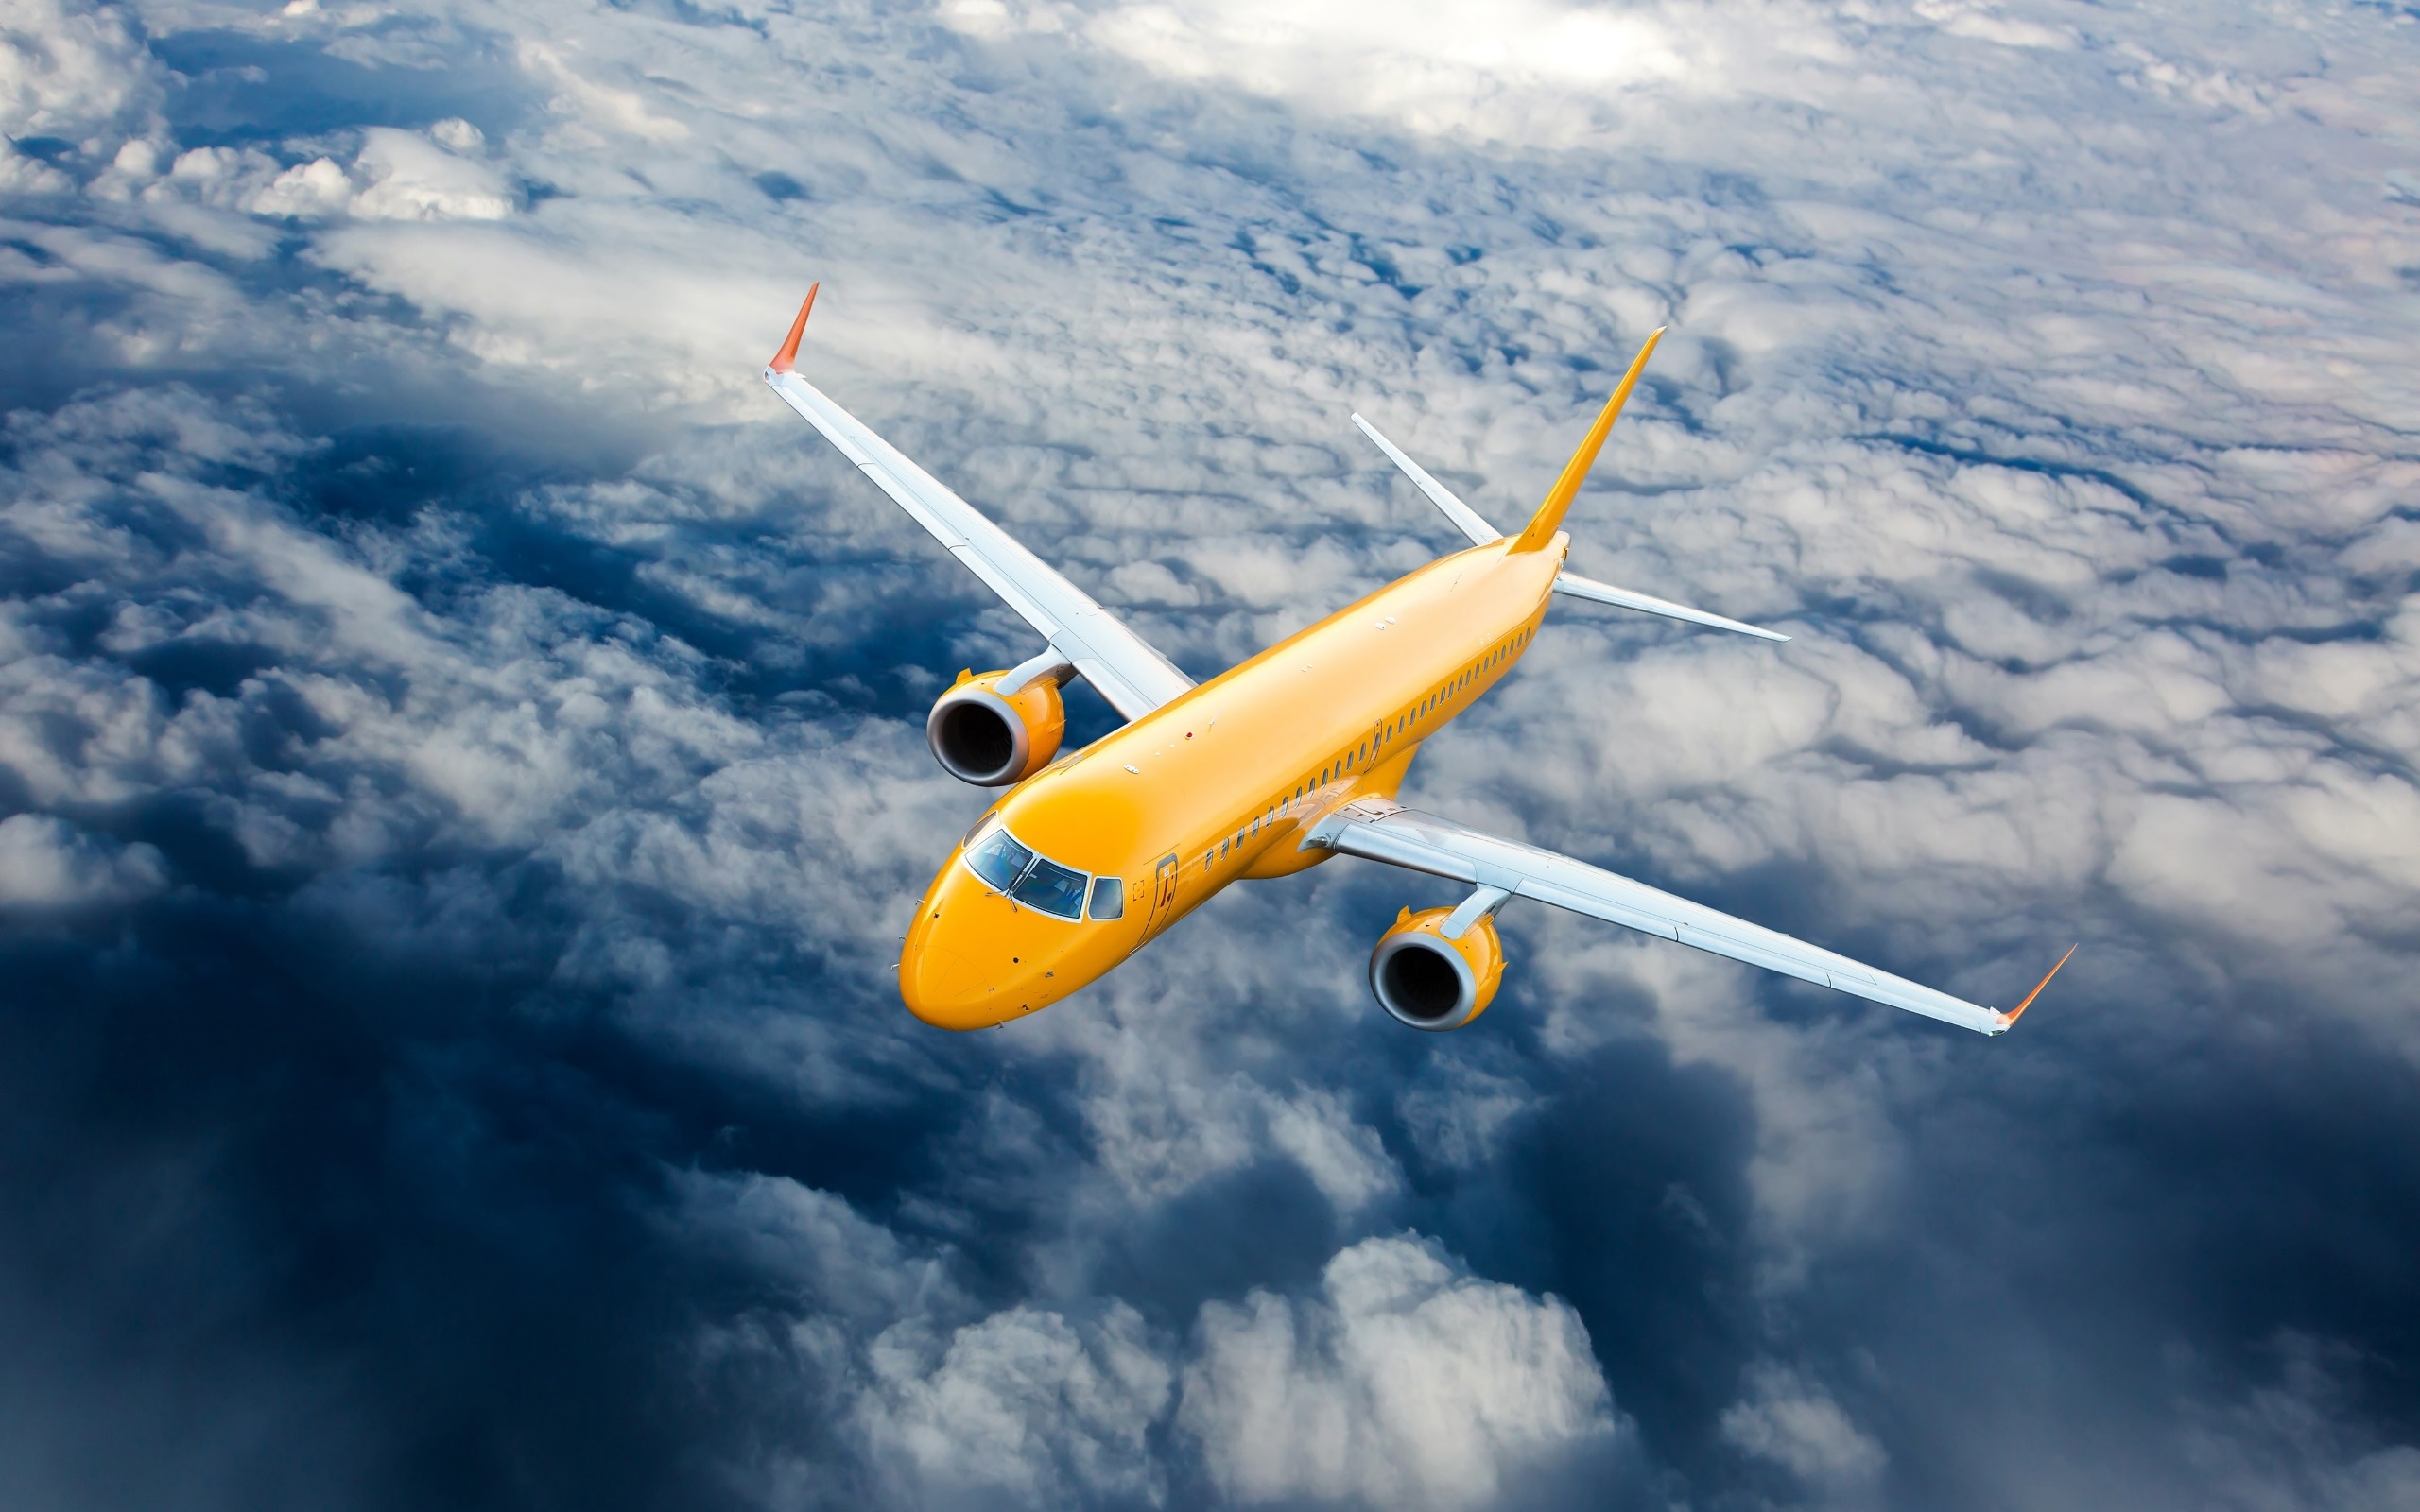 General 2560x1600 sky aircraft clouds vehicle yellow